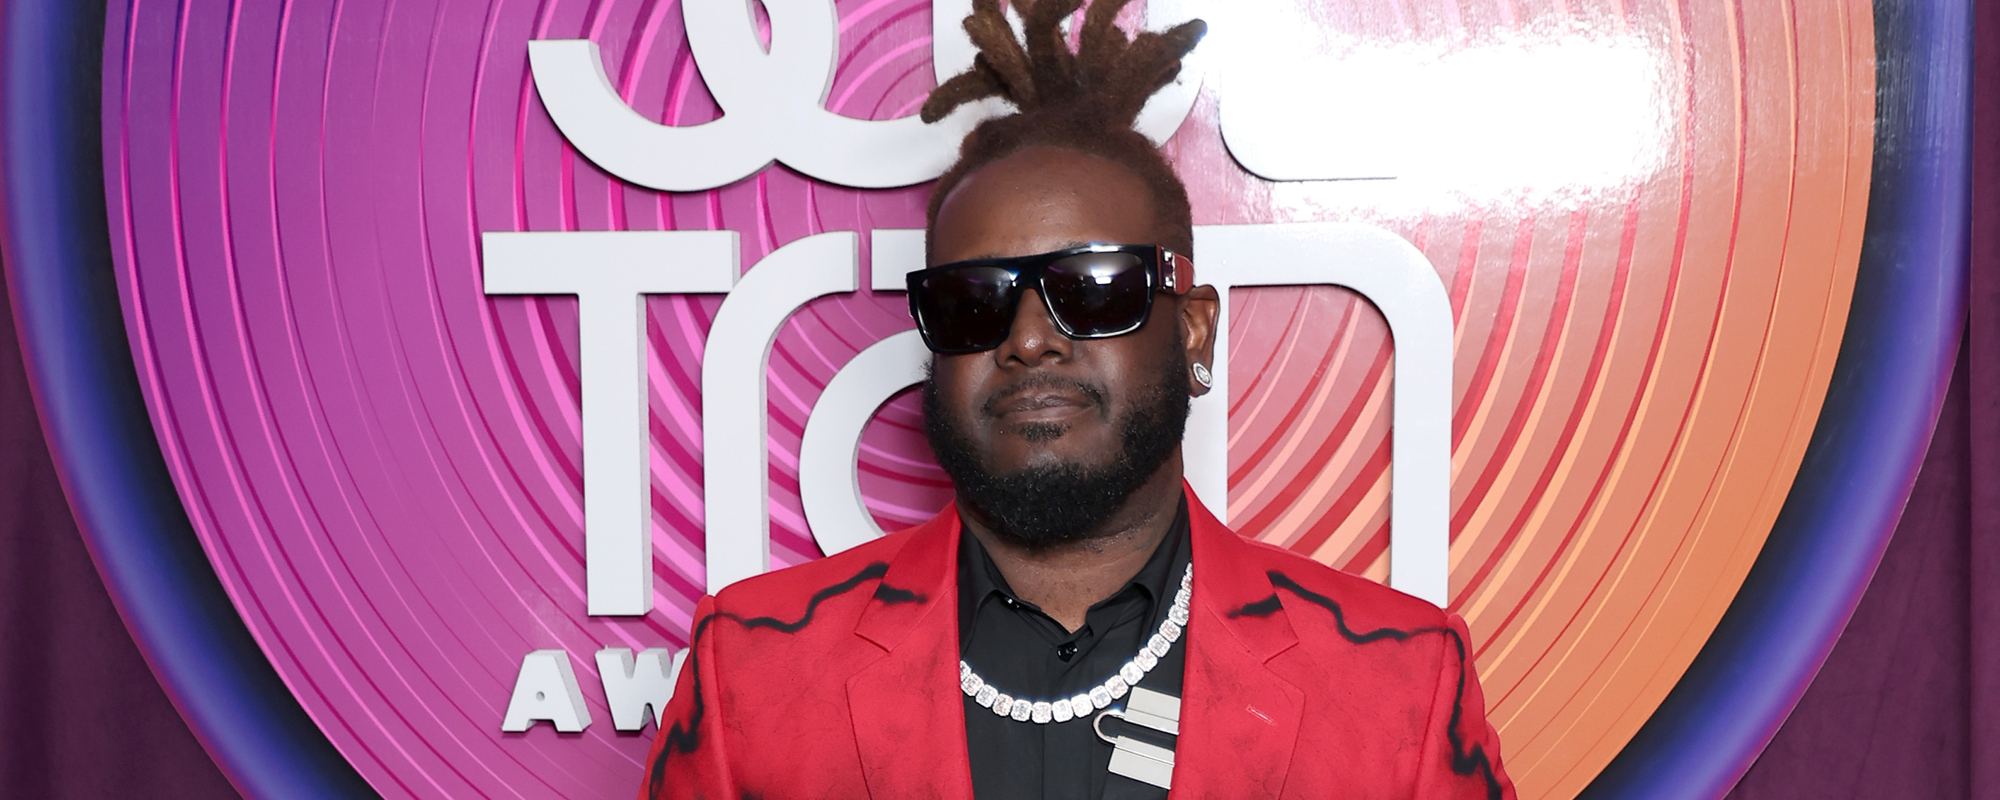 Watch T-Pain’s Smooth Cover of “Tennessee Whiskey” Ahead of Las Vegas Residency Announcement